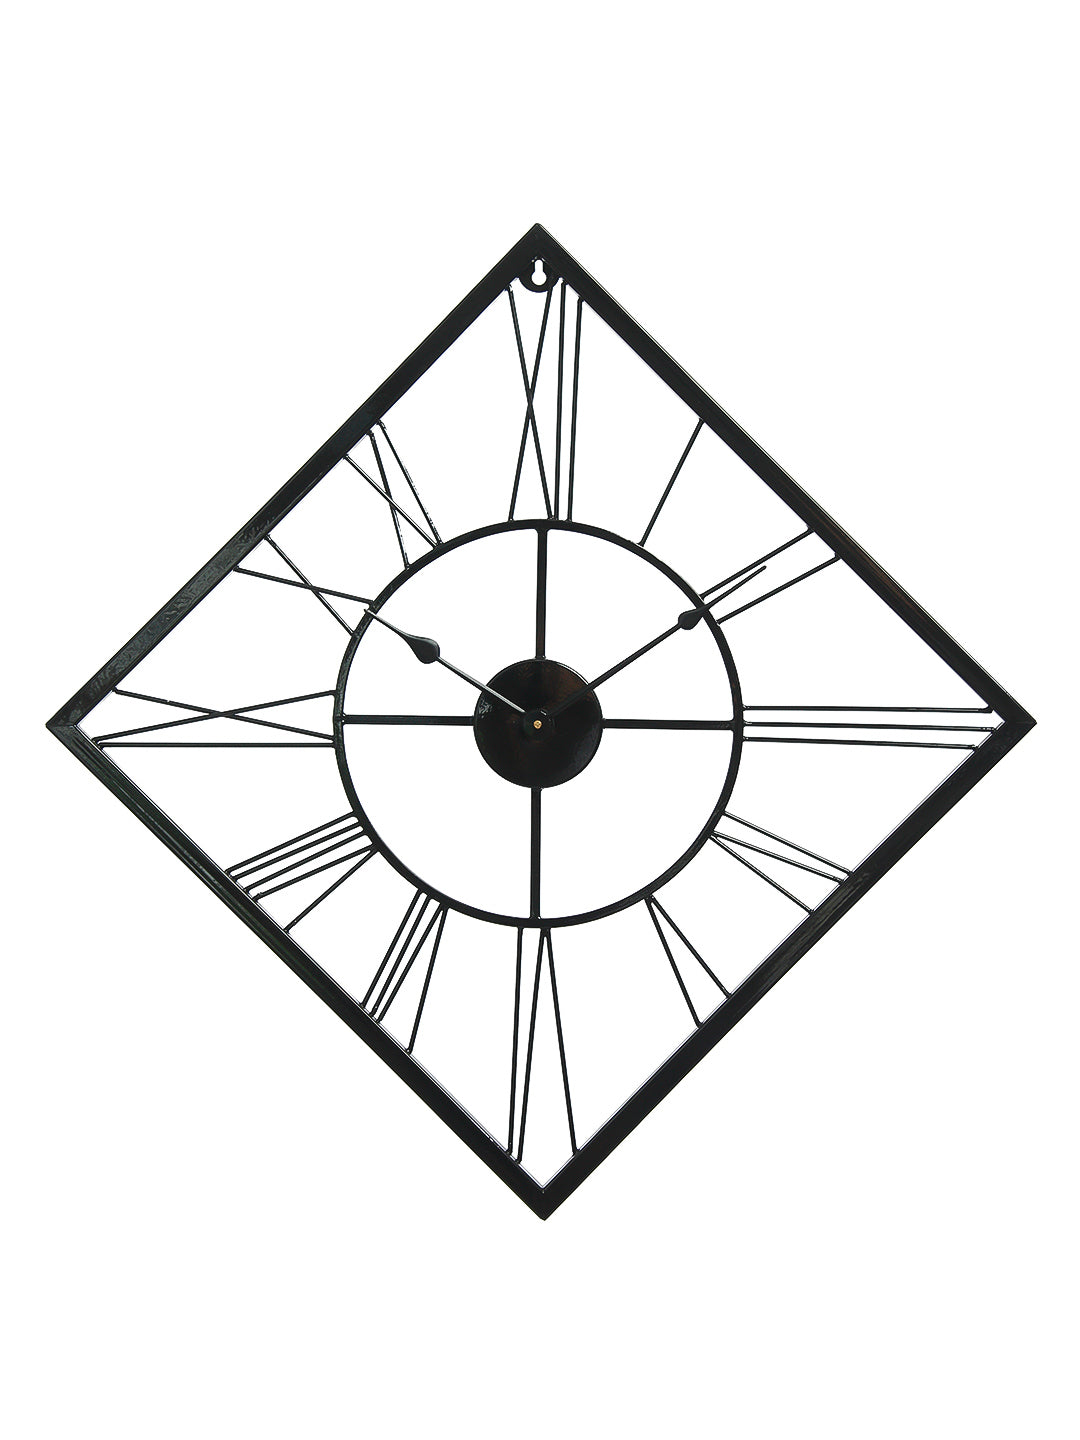 Black Iron Kite Shape Handcrafted Analog Roman Number Wall Clock Without Glass